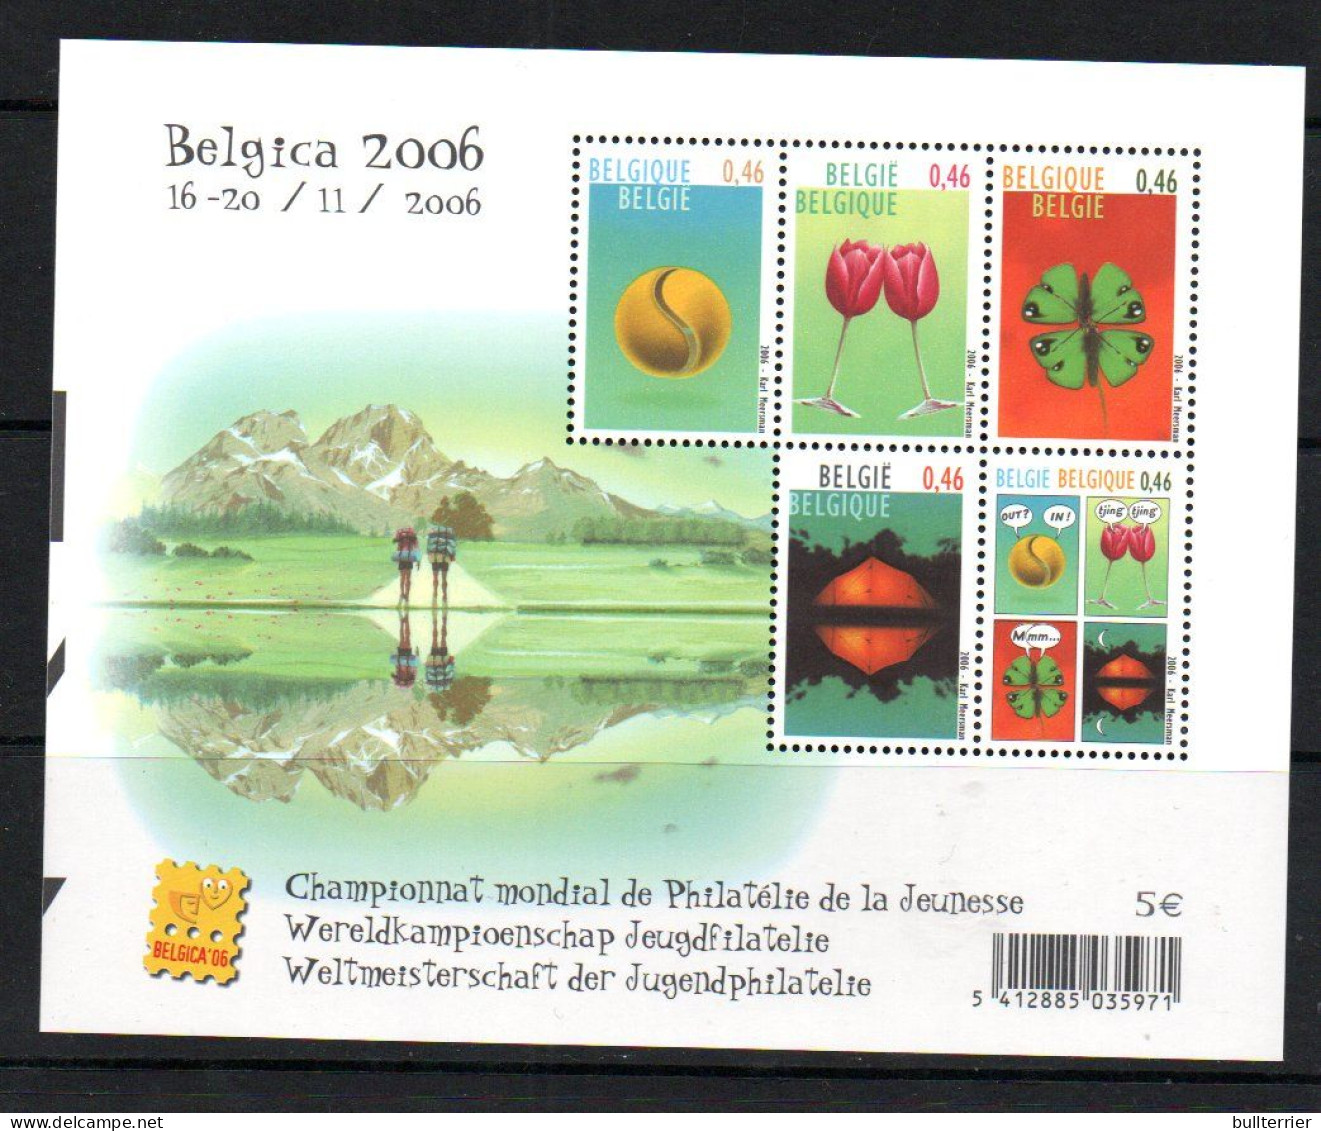 BELGIUM - 2006 -BELGICA EXHIBITION S/SHEET MINT NEVER HINGED , SG CAT £44 - Unused Stamps